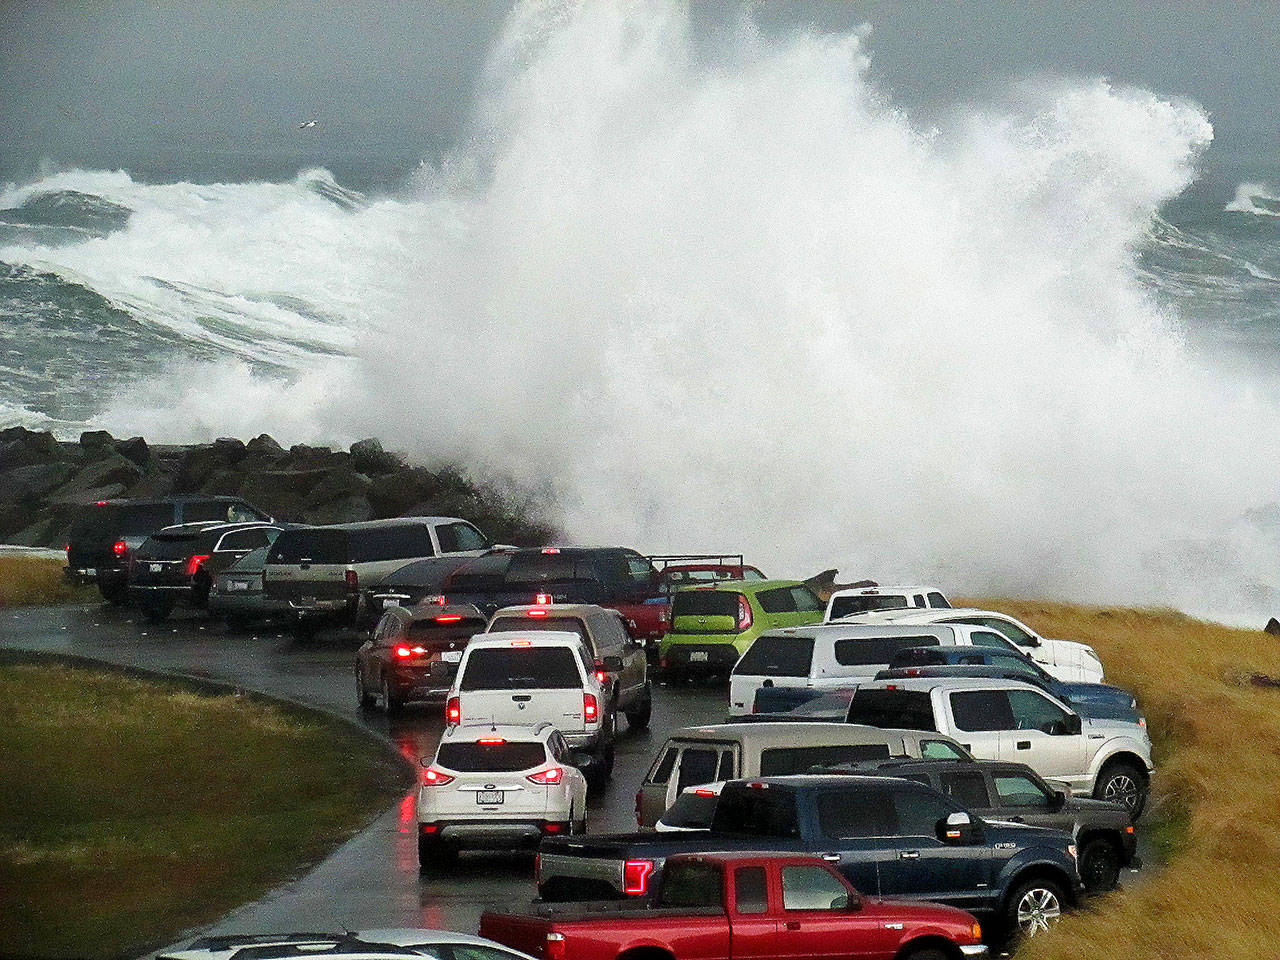 Scott D. Johnston photo: A wave breaks against the jetty rocks, sending spray onto the vehicles in the parking lot at the end of Ocean Shores Boulevard during the high surf storm surge at high tide on Thursday afternoon.